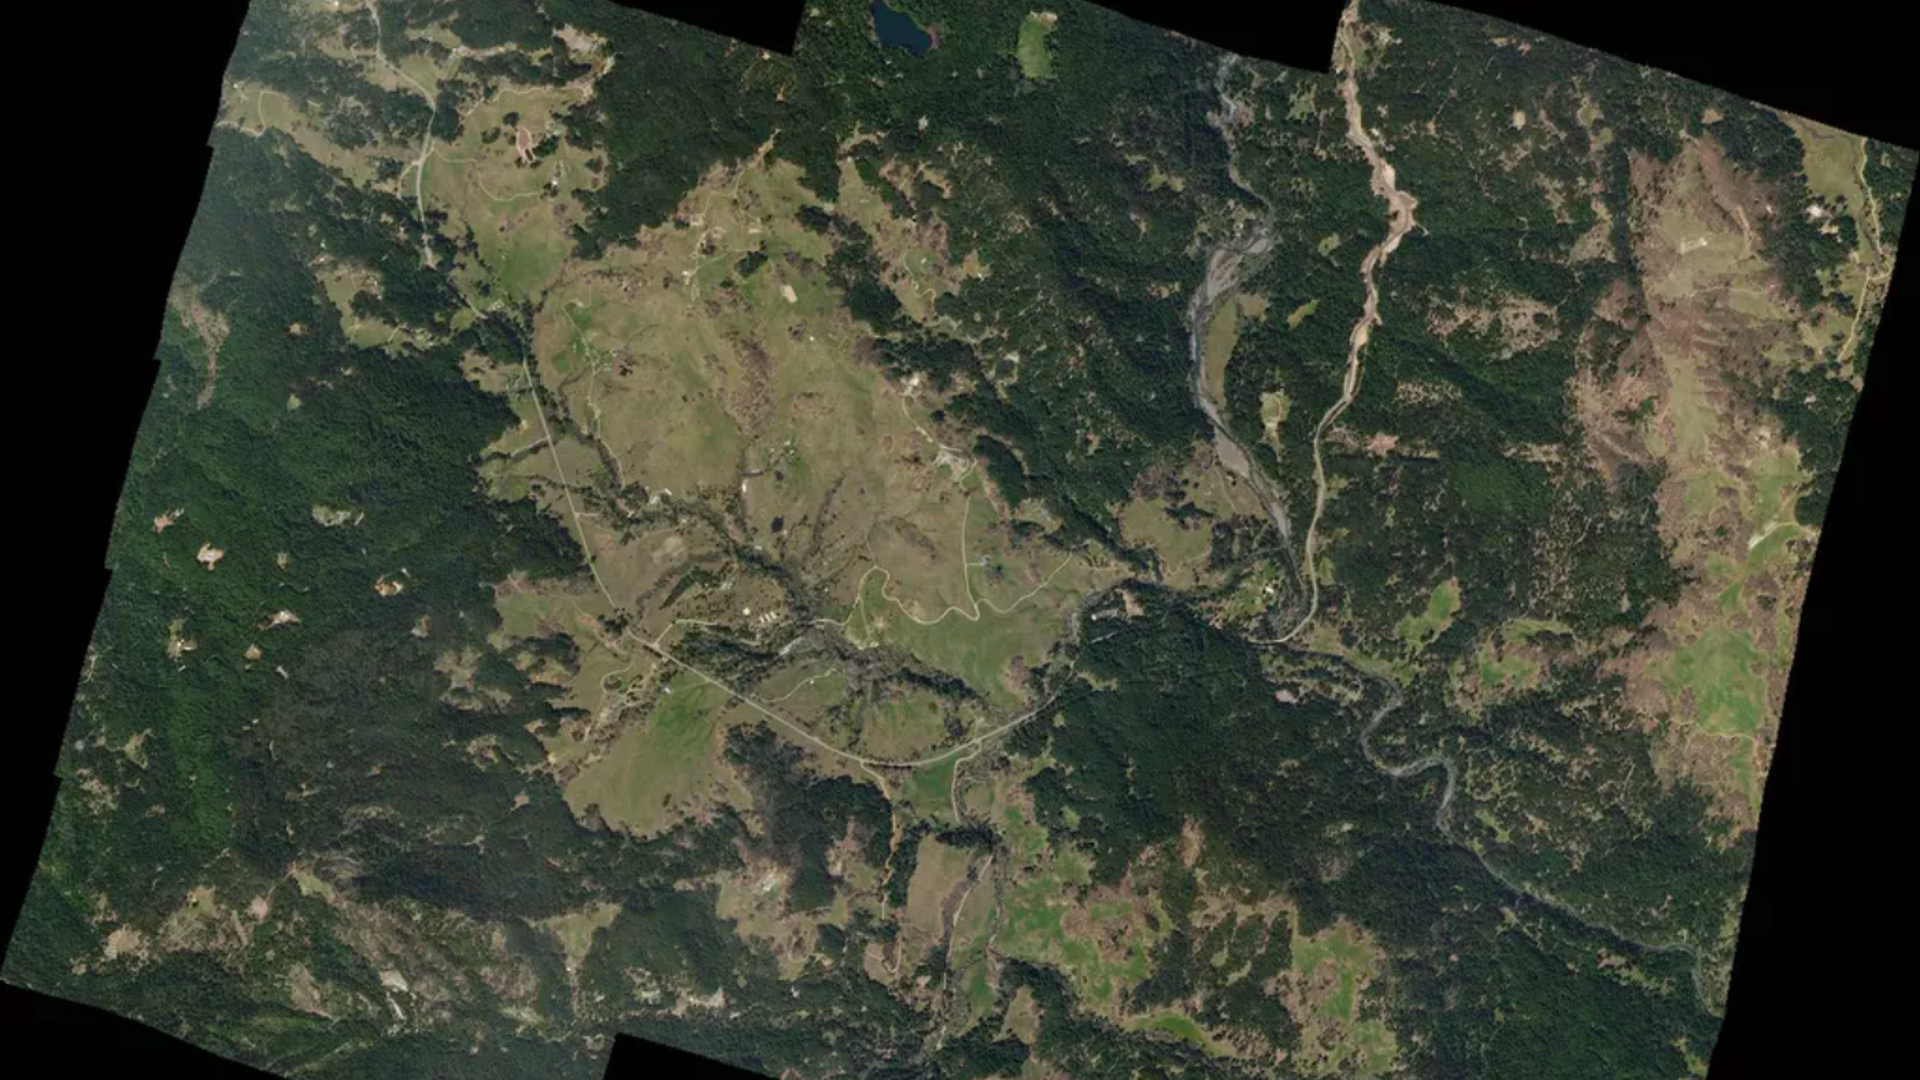 This image is a satellite image or birds eye view of a mountainous and forested region. 